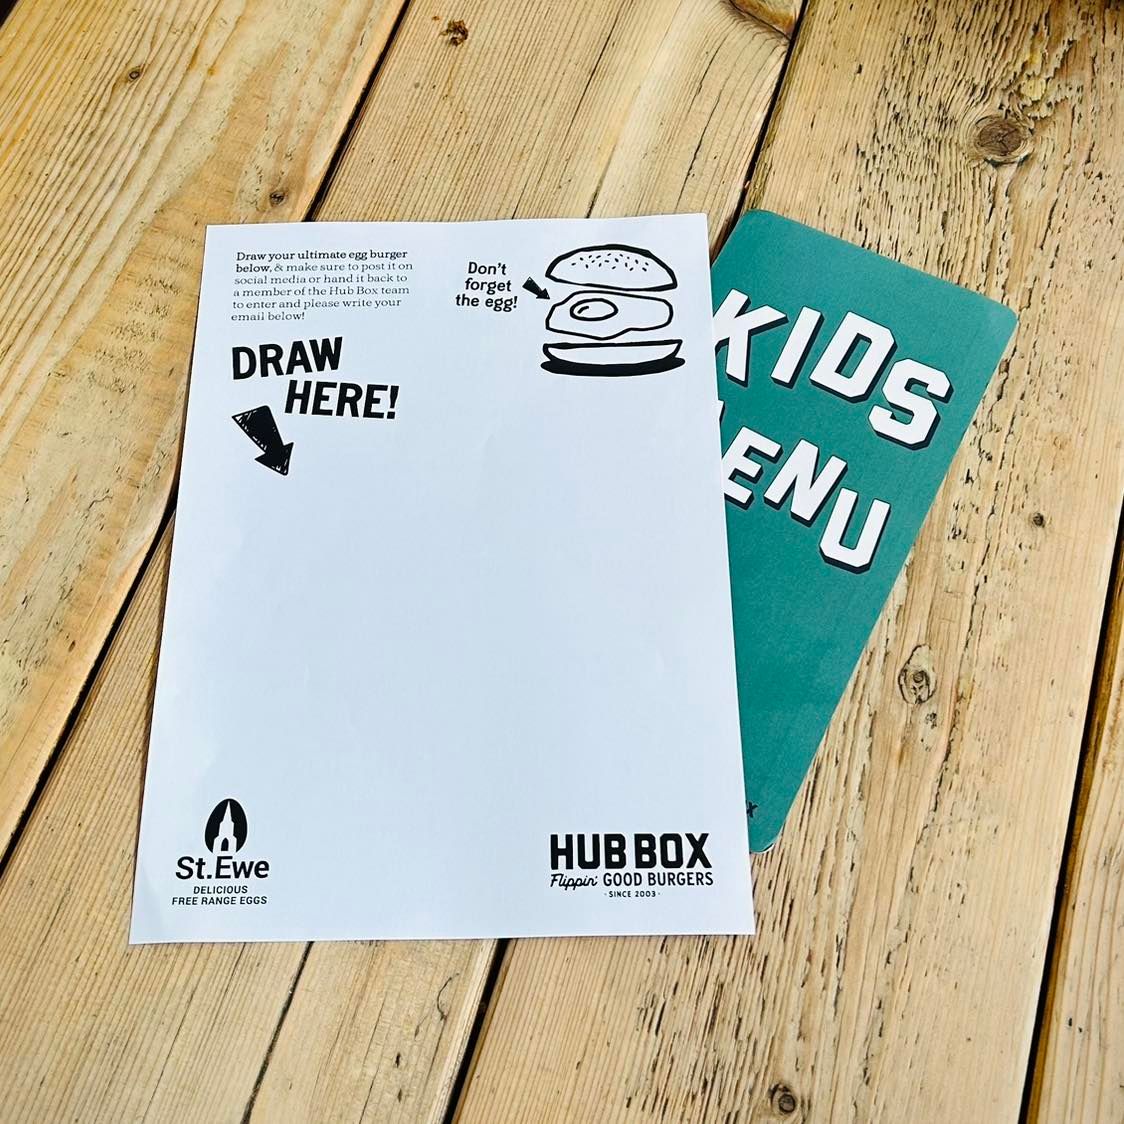 NATIONAL BURGER DAY COMPETITION 👌👌 WIN a £100 Hub Box voucher & a months supply of @steweeggs 🍔🍳 An awesome competition for the kids to get involved with. Find out more 👉bit.ly/457IoYA *don't have IG or Facebook? You can email your entry to info@hubbox.co.uk